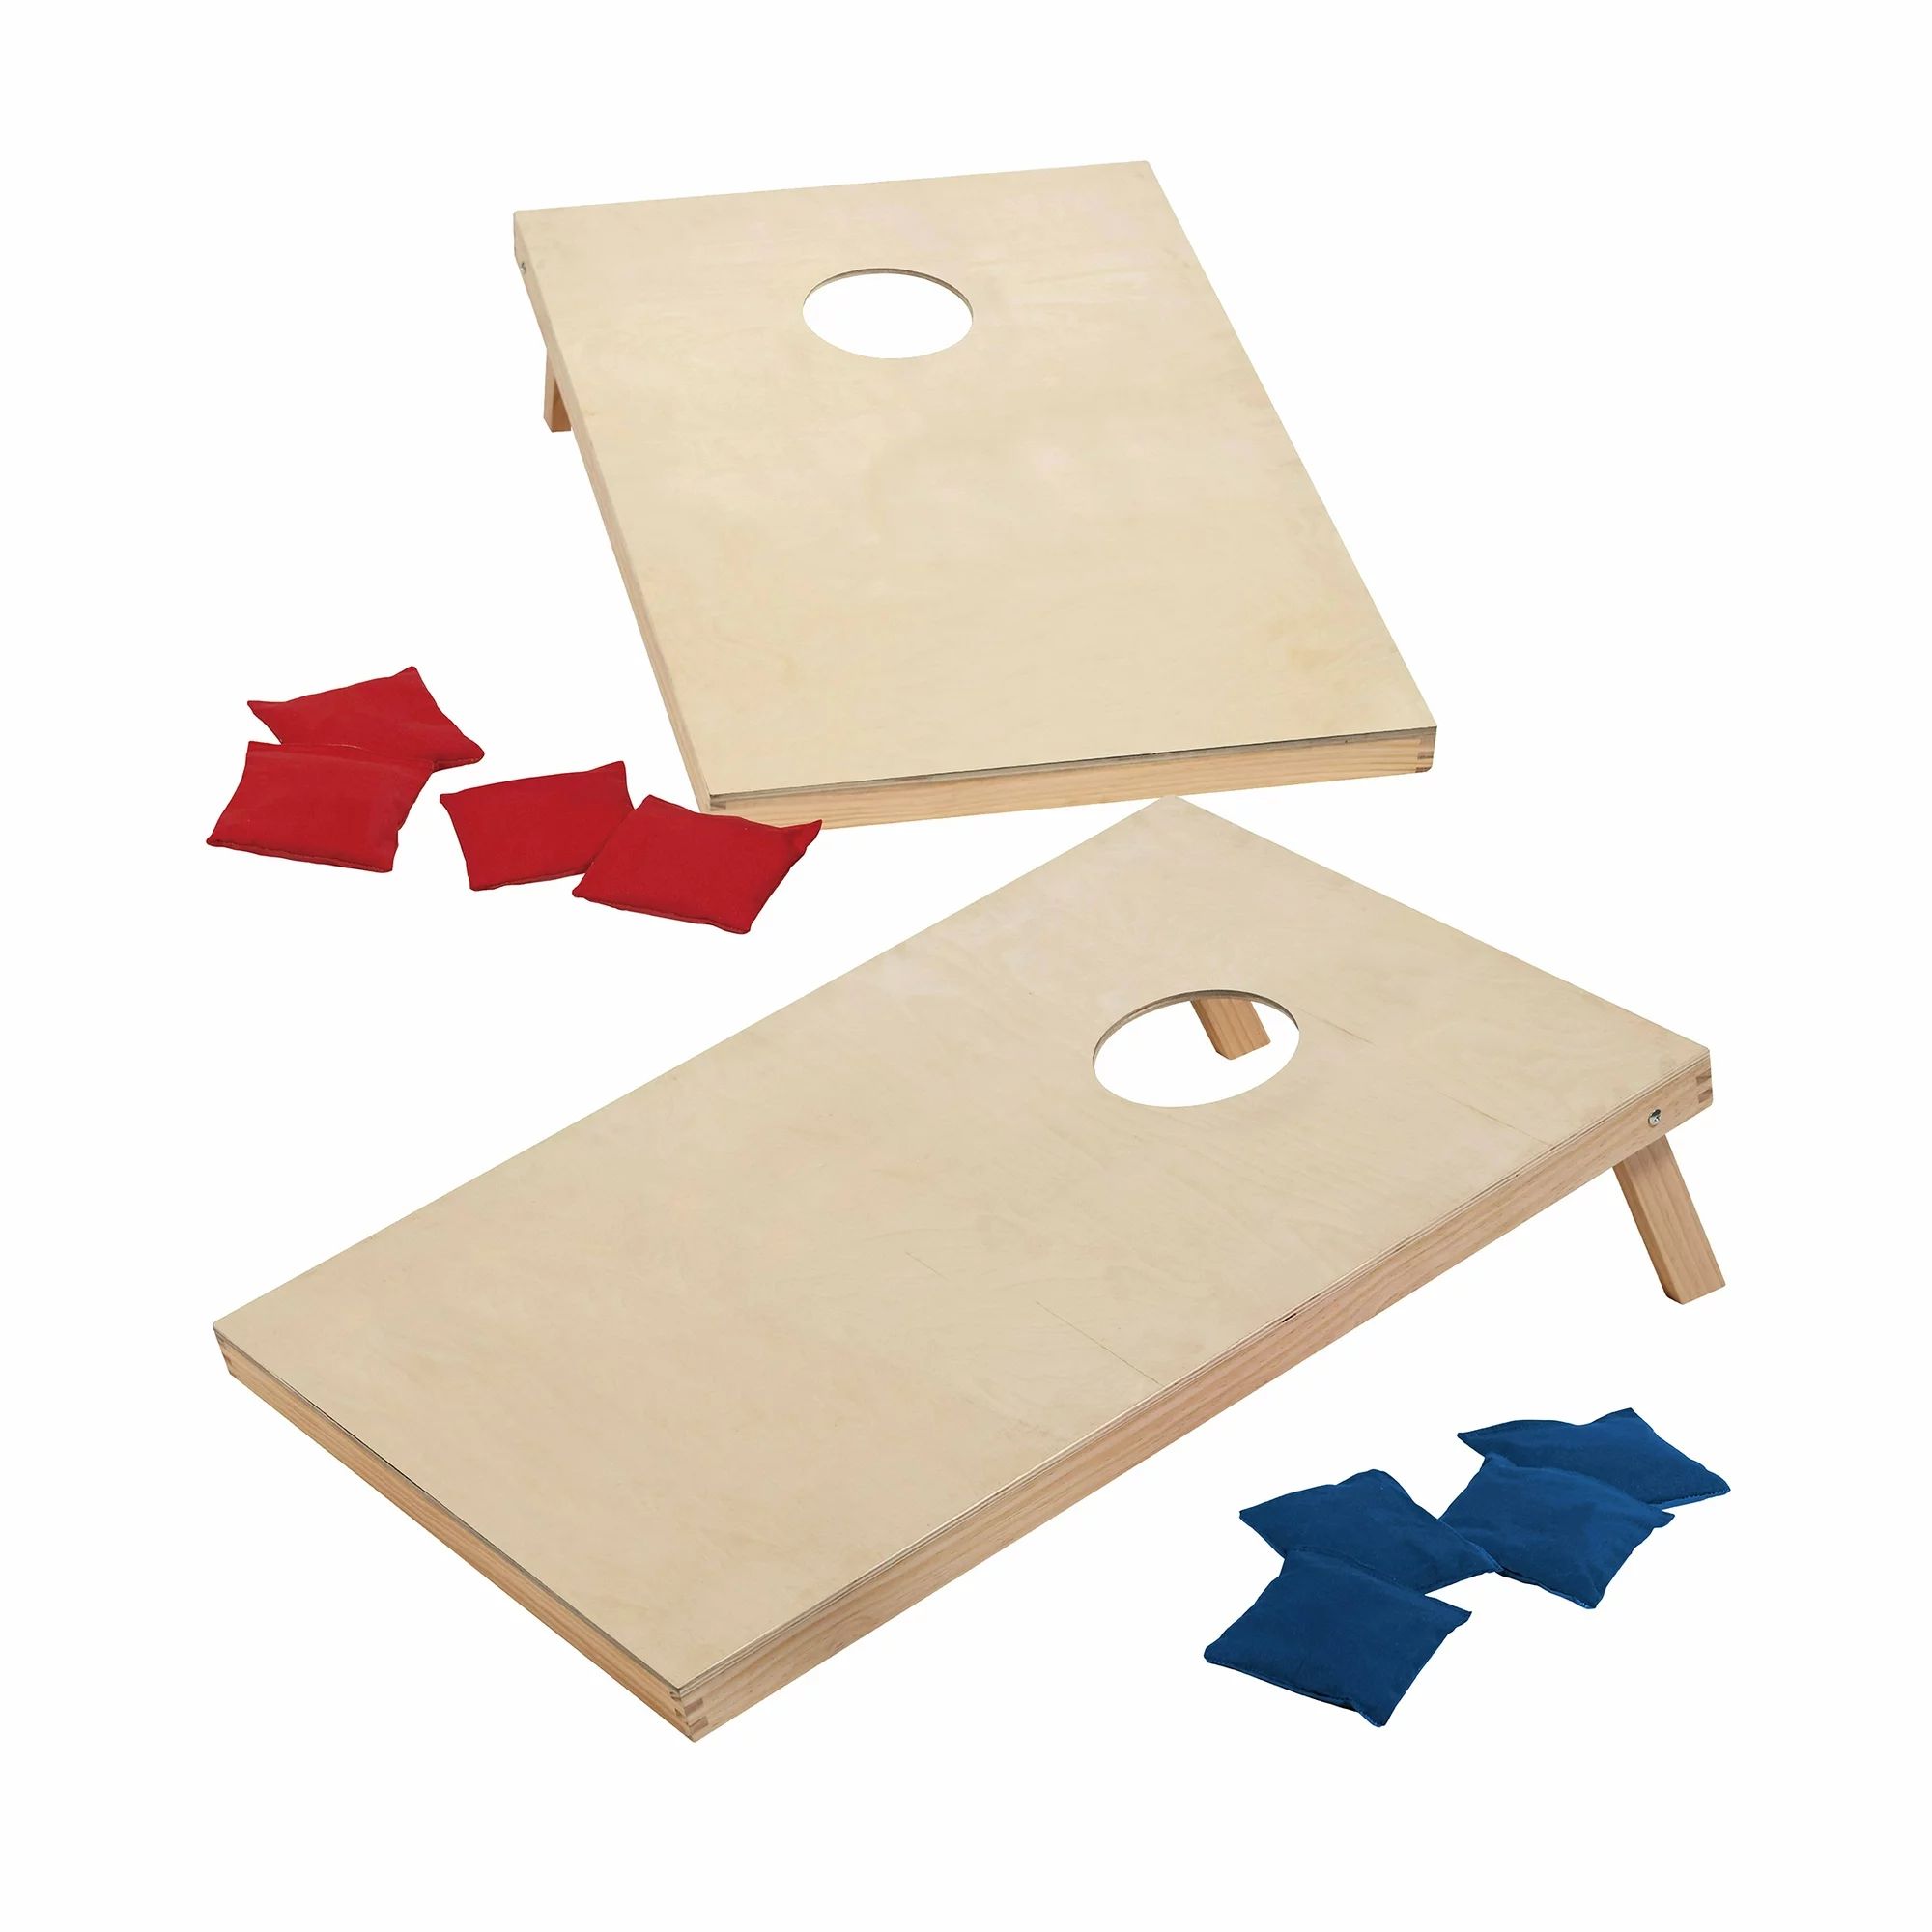 MD Sports 36-inch Solid Wood Cornhole Set with All-Weather Bean Bags, Lawn Games | Walmart (US)